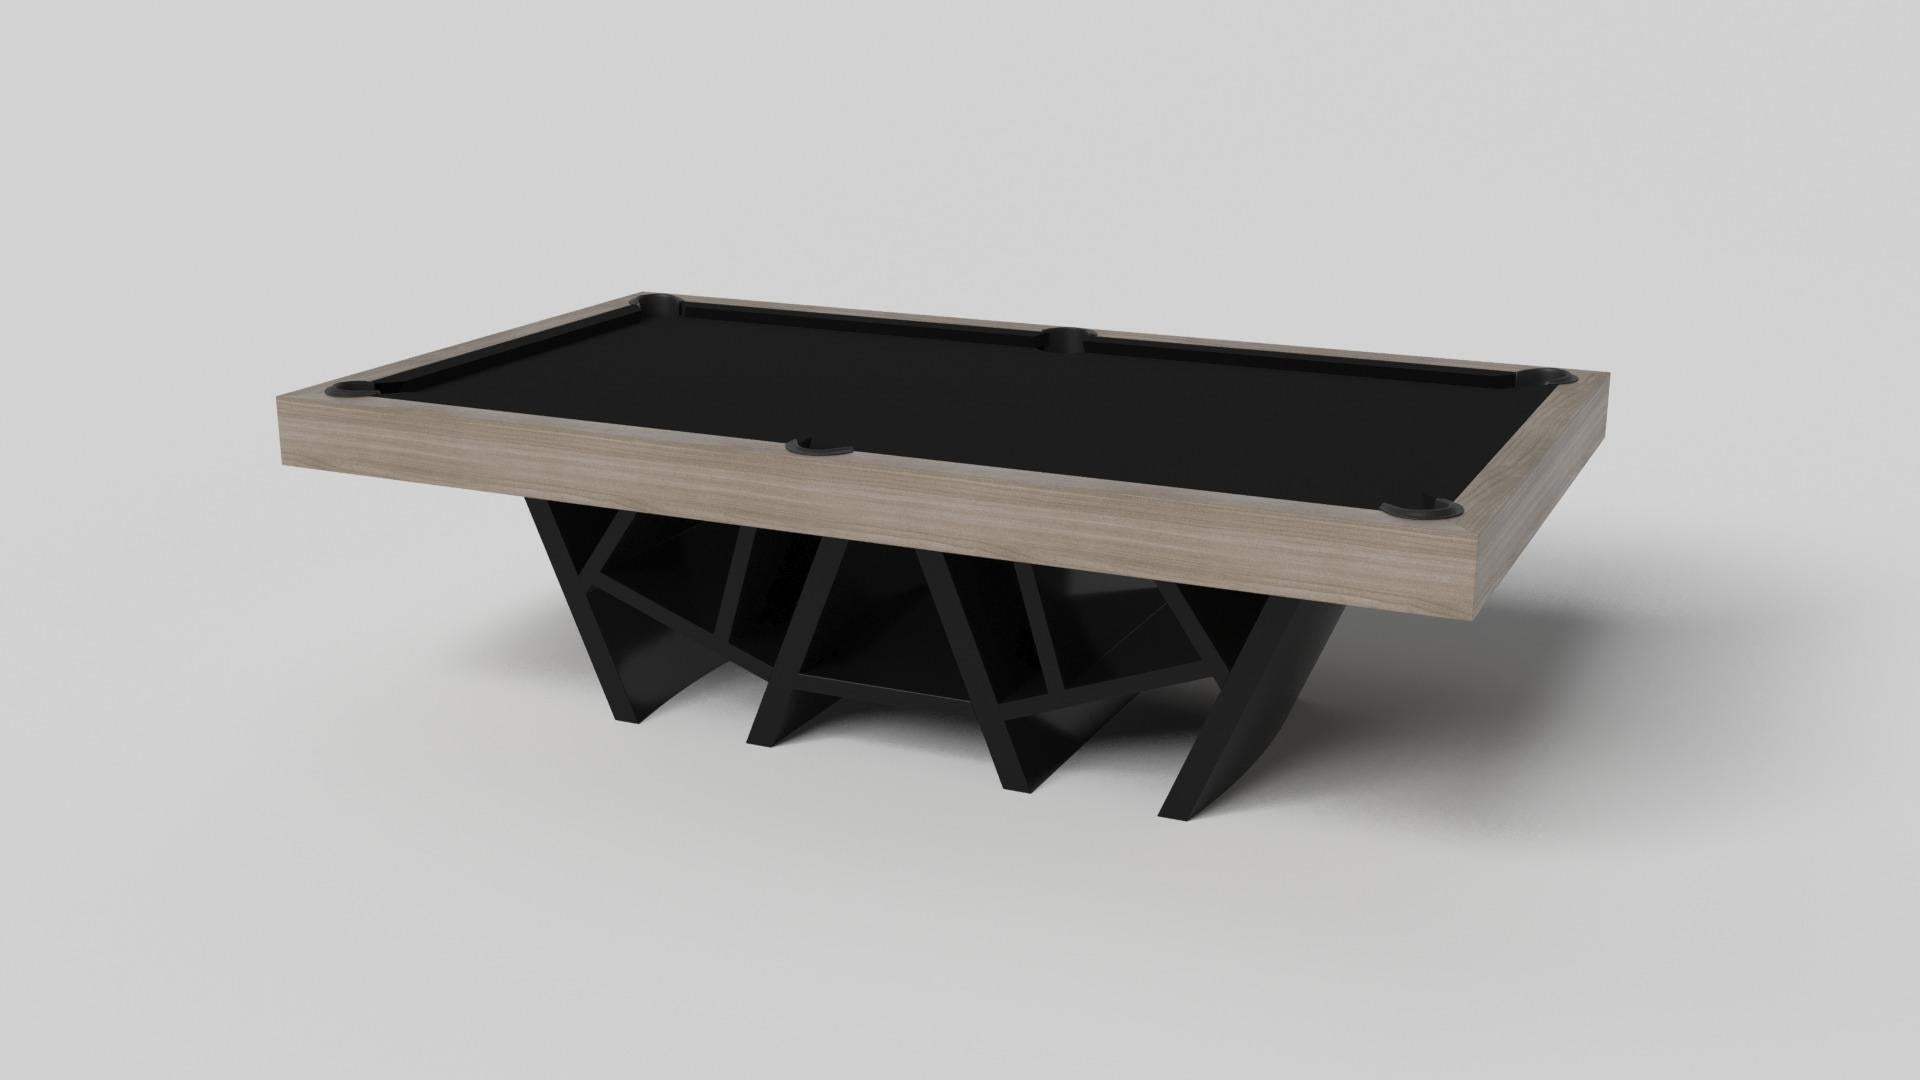 With a combination of acute angles, smooth lines, and geometric configurations, the Maze pool table in walnut is characterized by a labyrinth-inspired base with a mystifying motif. Beautifully detailed with a smooth black top for game play, this